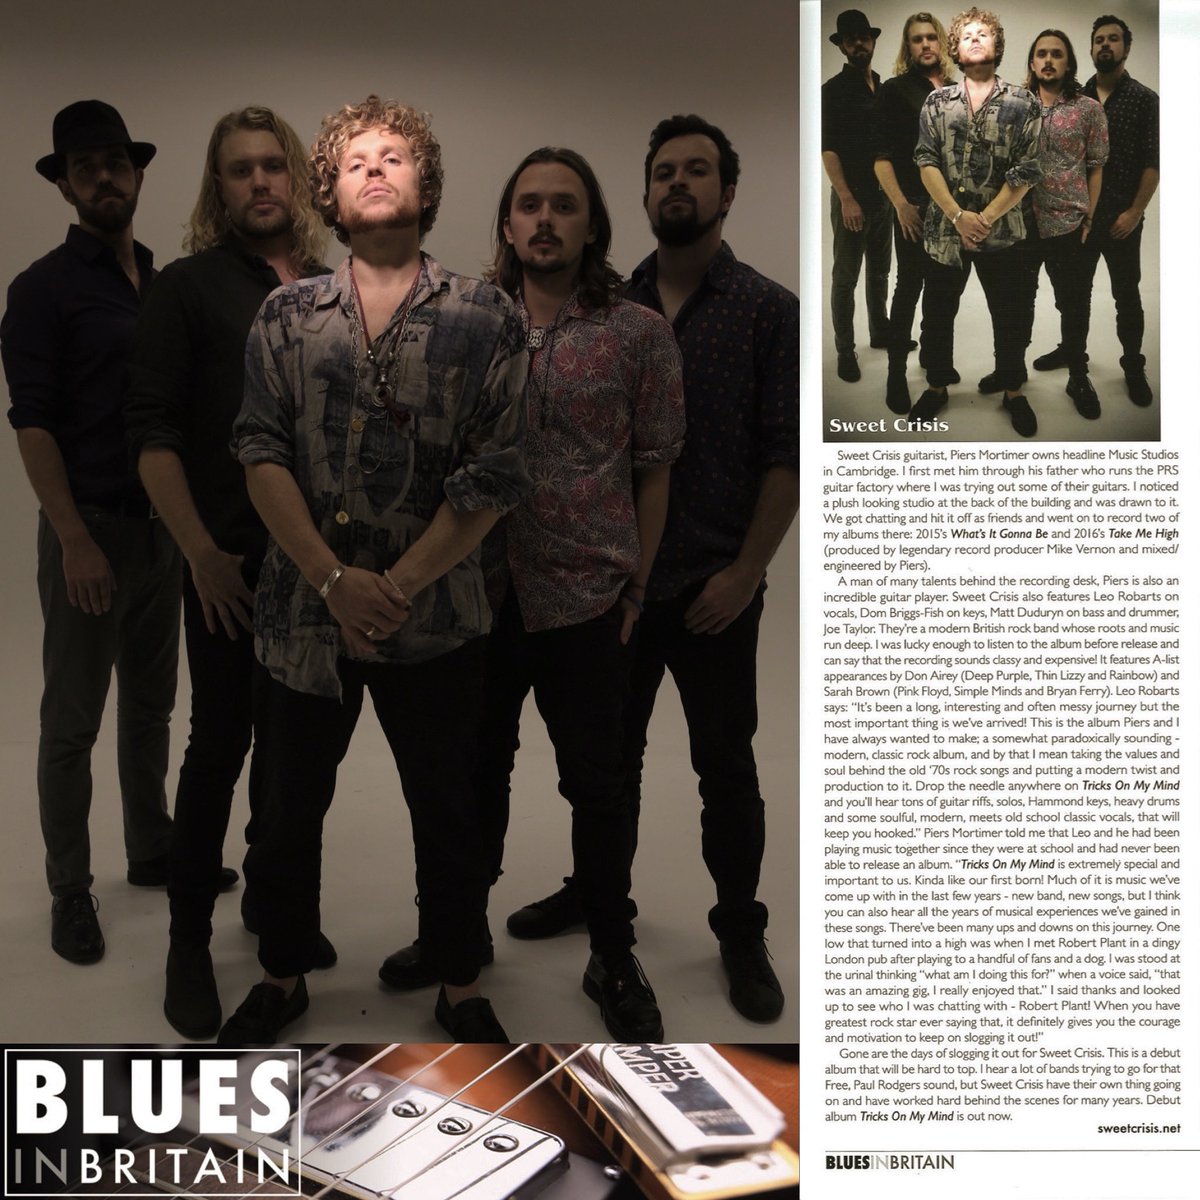 “This is a debut album that will be hard to top!”
- @BluesBritain Magazine 

Massive thanks to the kind words in Blues in Britain Magazine by @LaurenceJones! Tricks On My Mind available now! Listen now -

li.sten.to/tricksonmymind